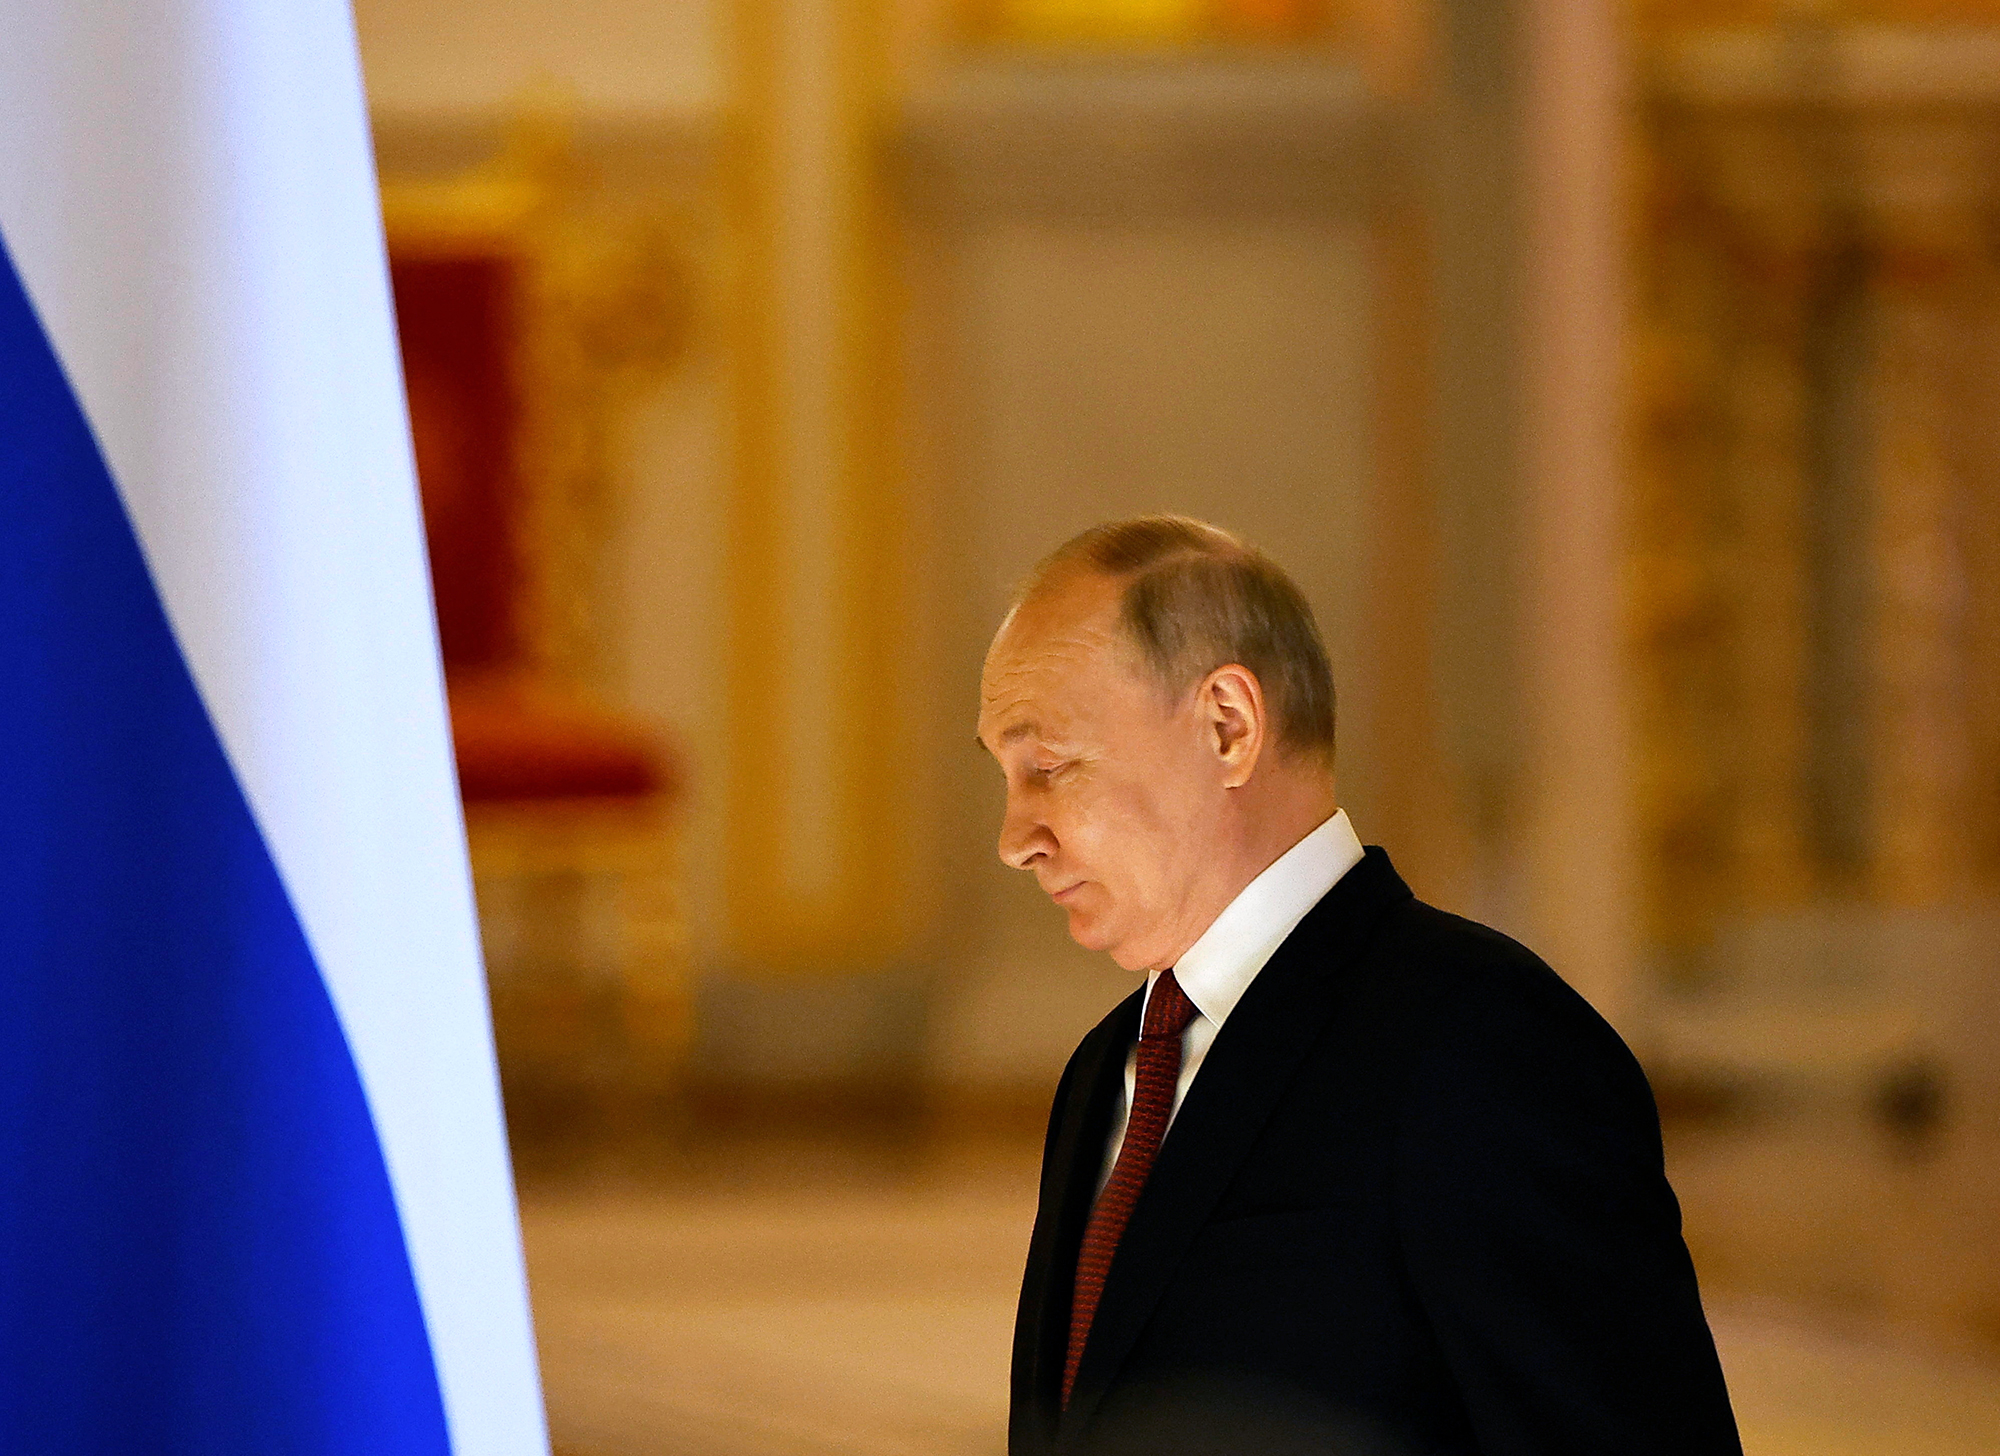 Russian President Vladimir Putin attends a meeting in Moscow on March 20.